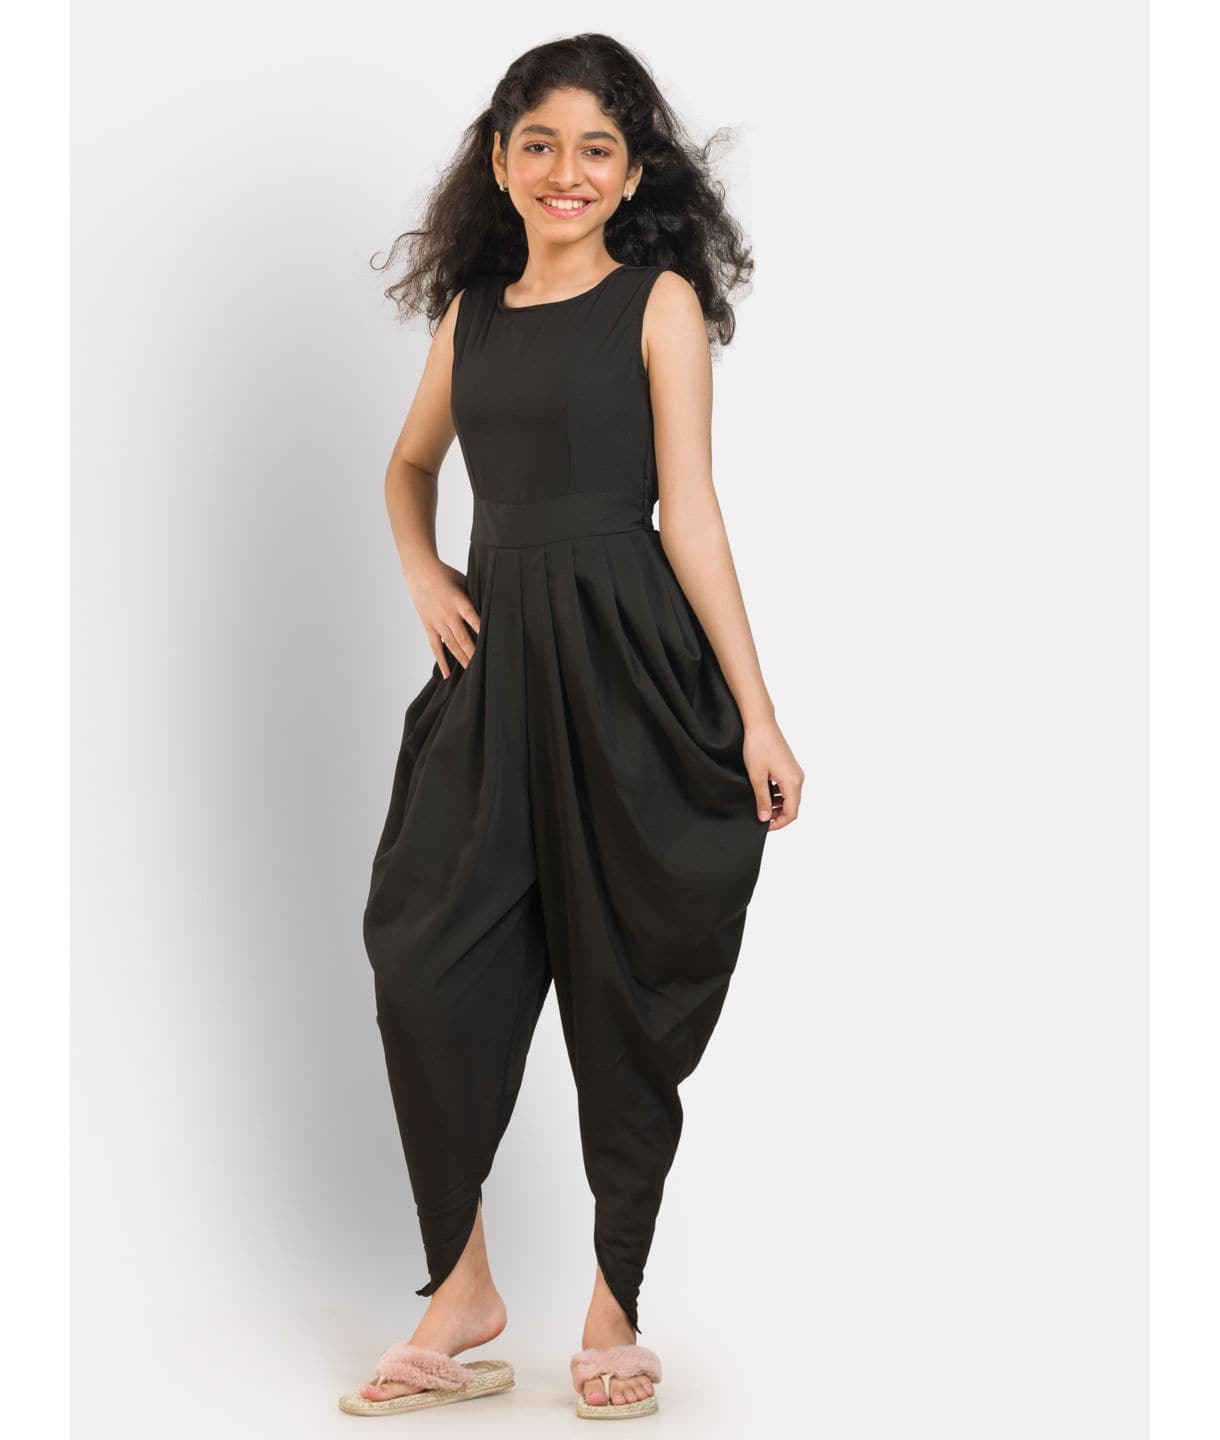 Floral Printed Elasticated Dhoti Jumpsuit for Girls - Uptownie